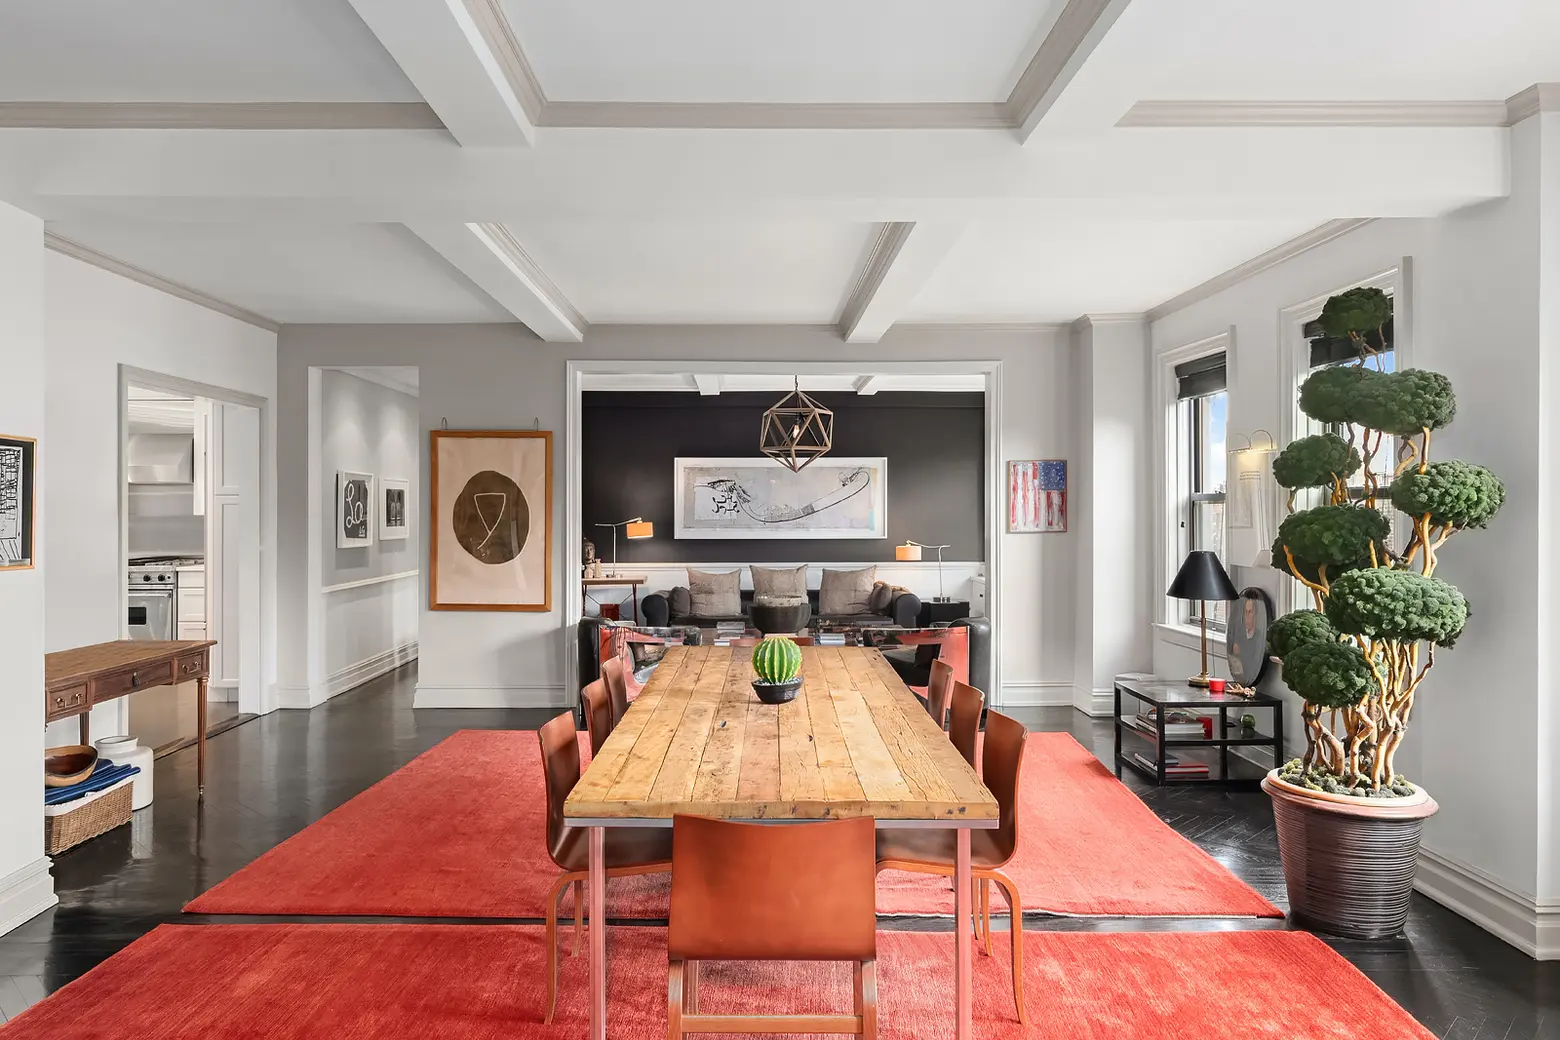 For $4M, an Upper East Side condo with a designer pedigree